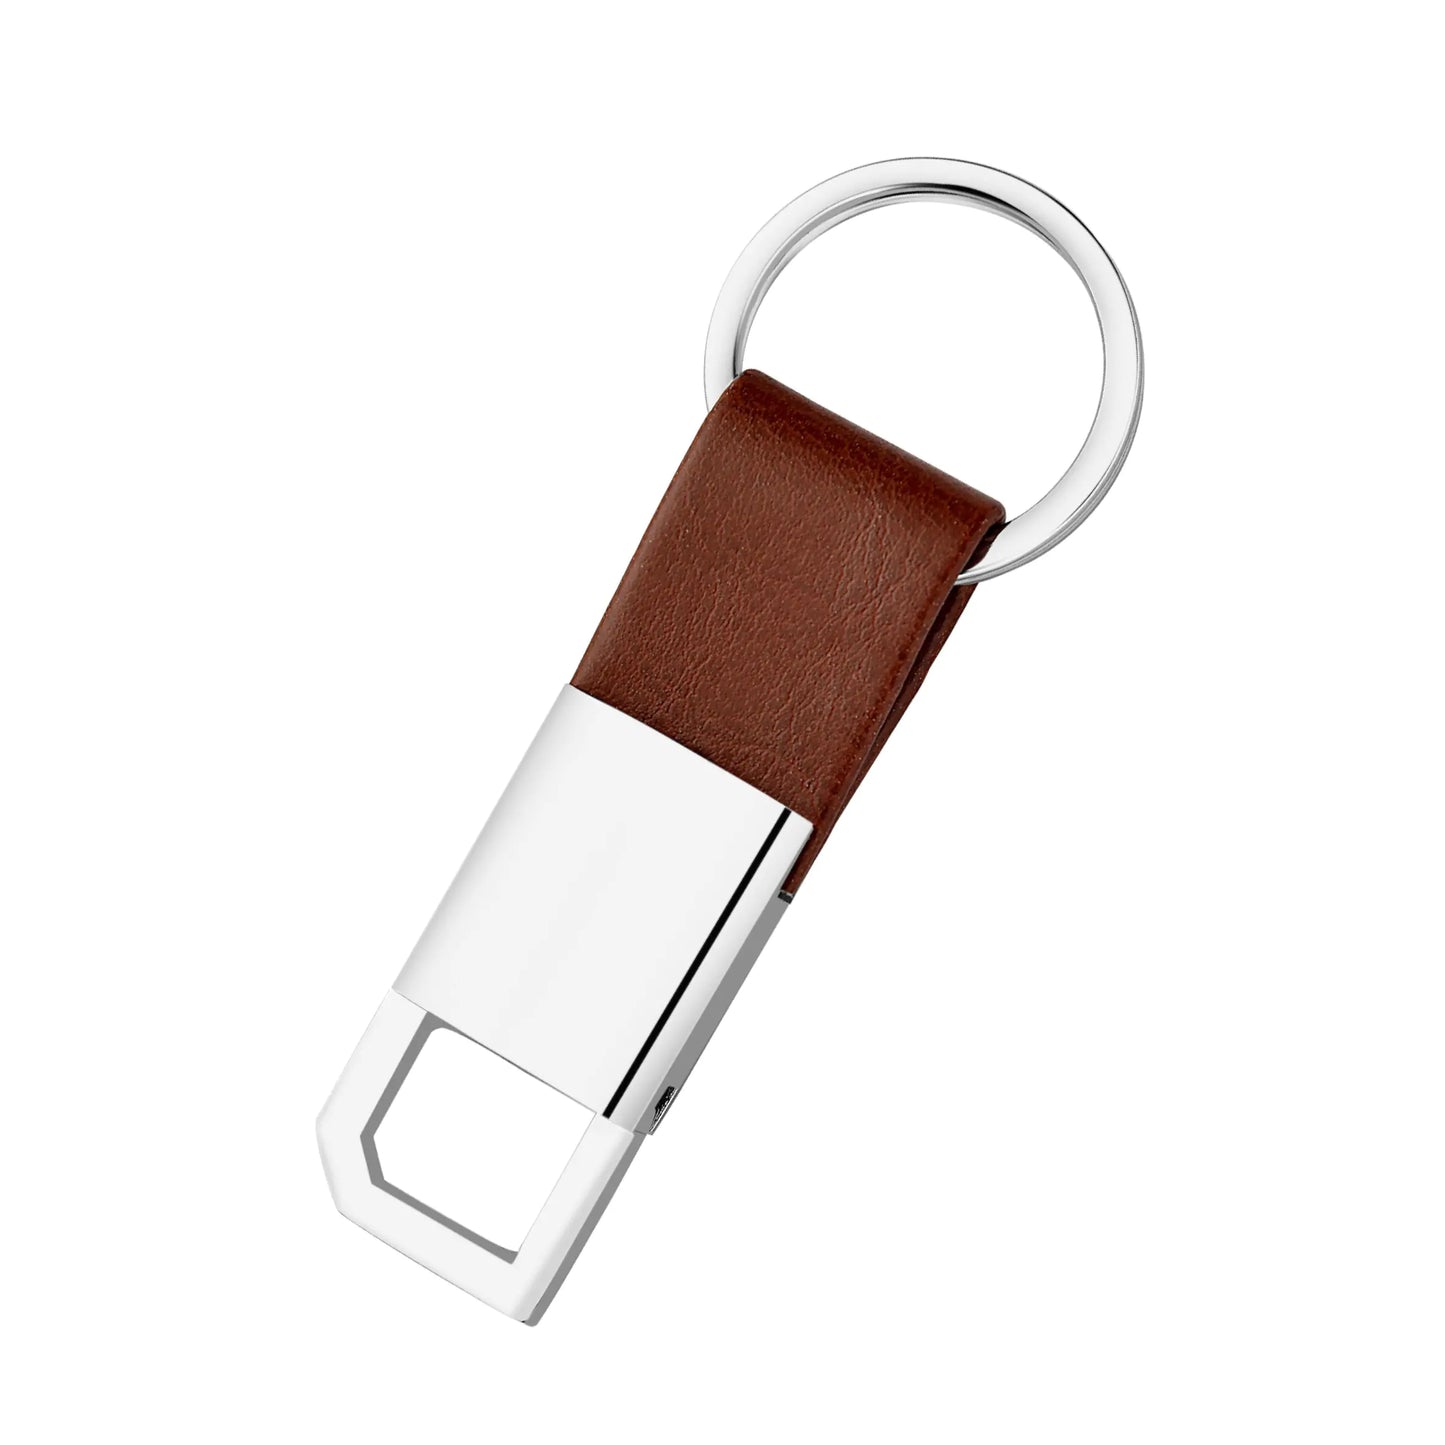 Brown Metal Keychain - For Employee, Client, Dealer, or Corporate Gifting, Events Promotional Freebie JKC9